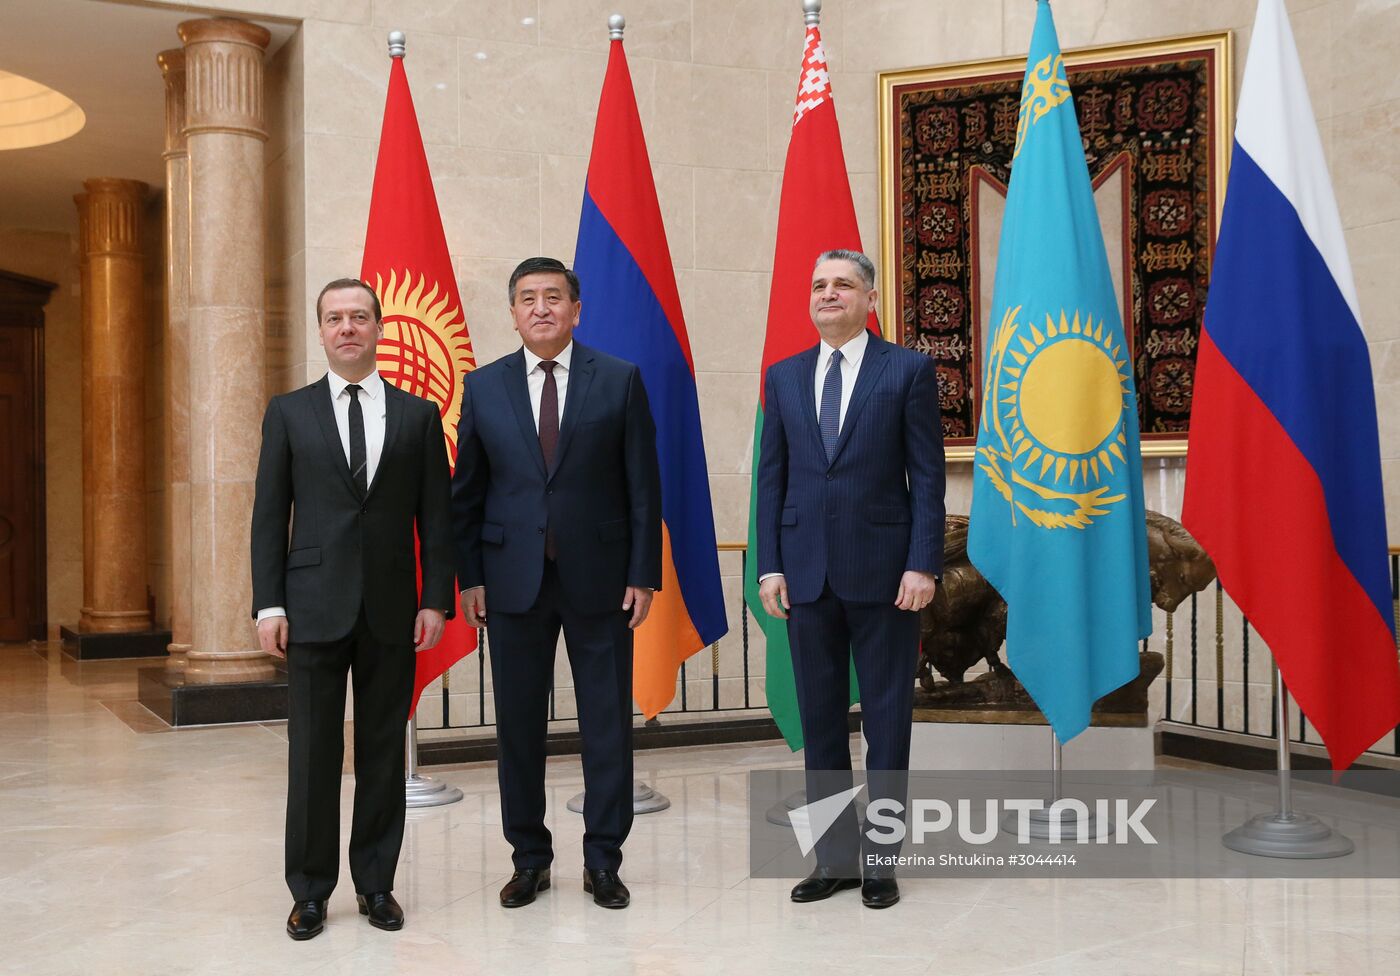 Russian Prime Minister Dmitry Medvedev pays an official visit to Kyrgyzstan